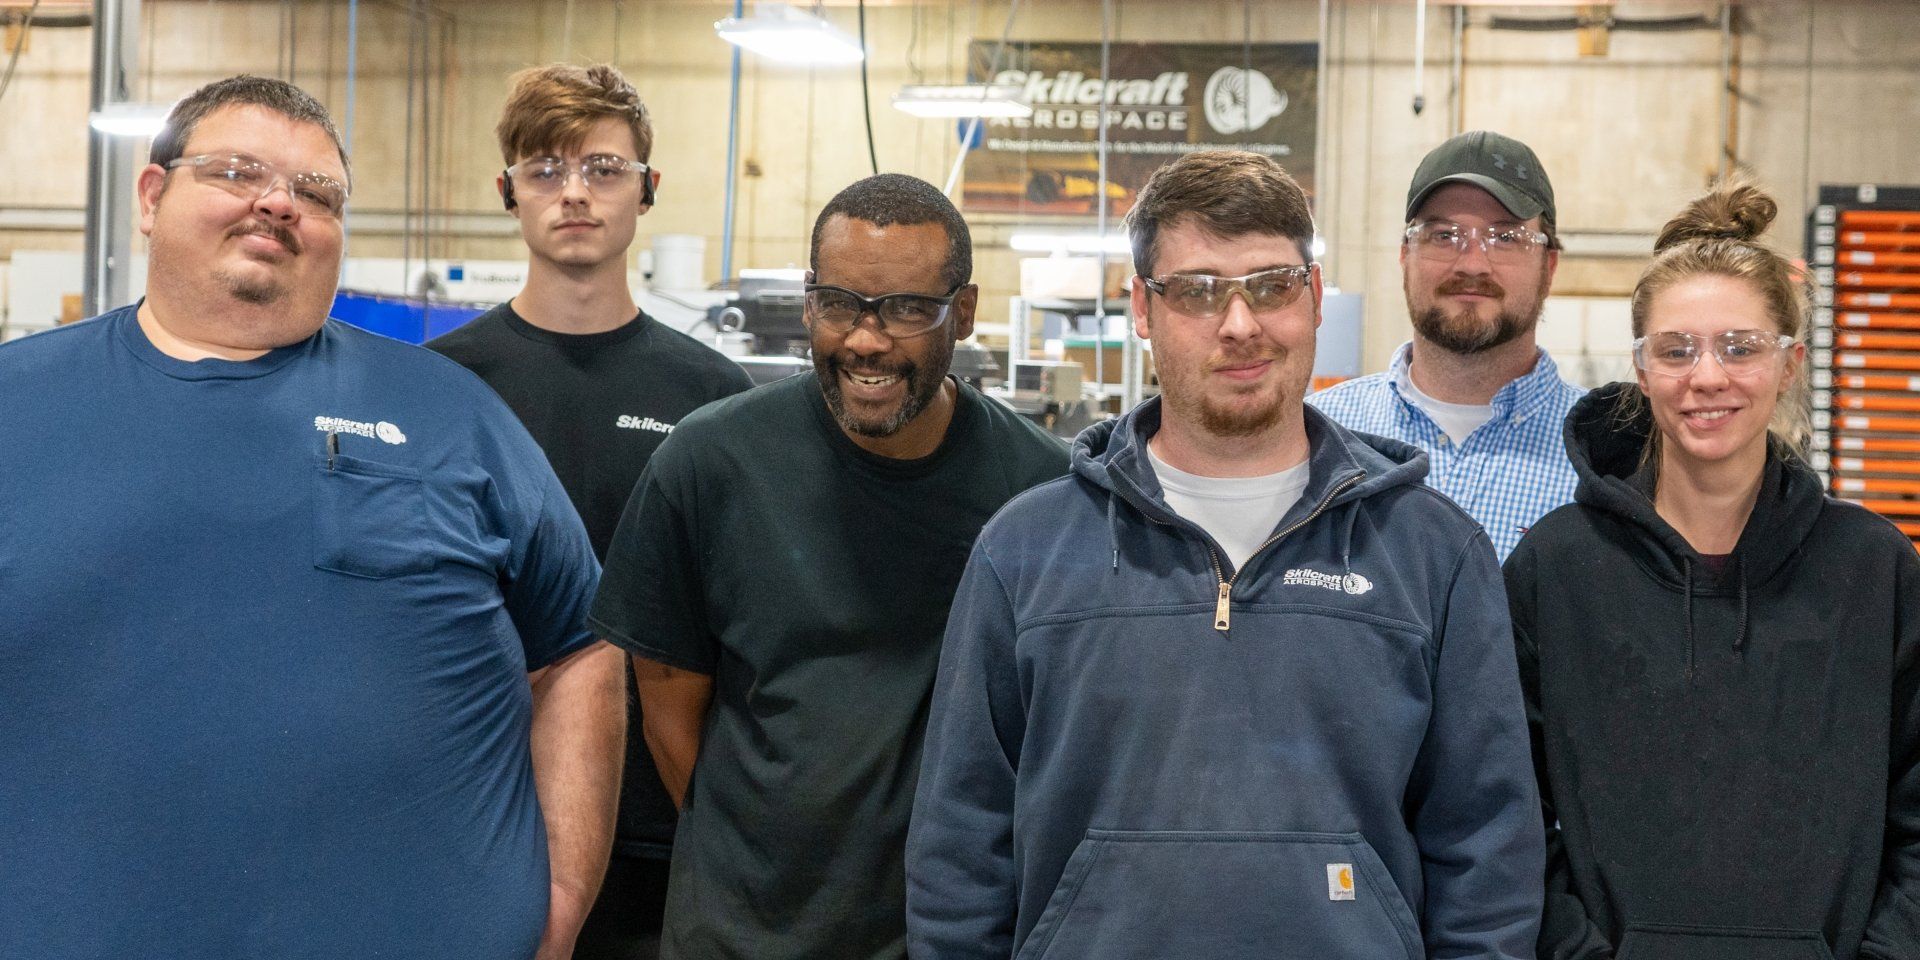 Skilcraft employees - second group of 5